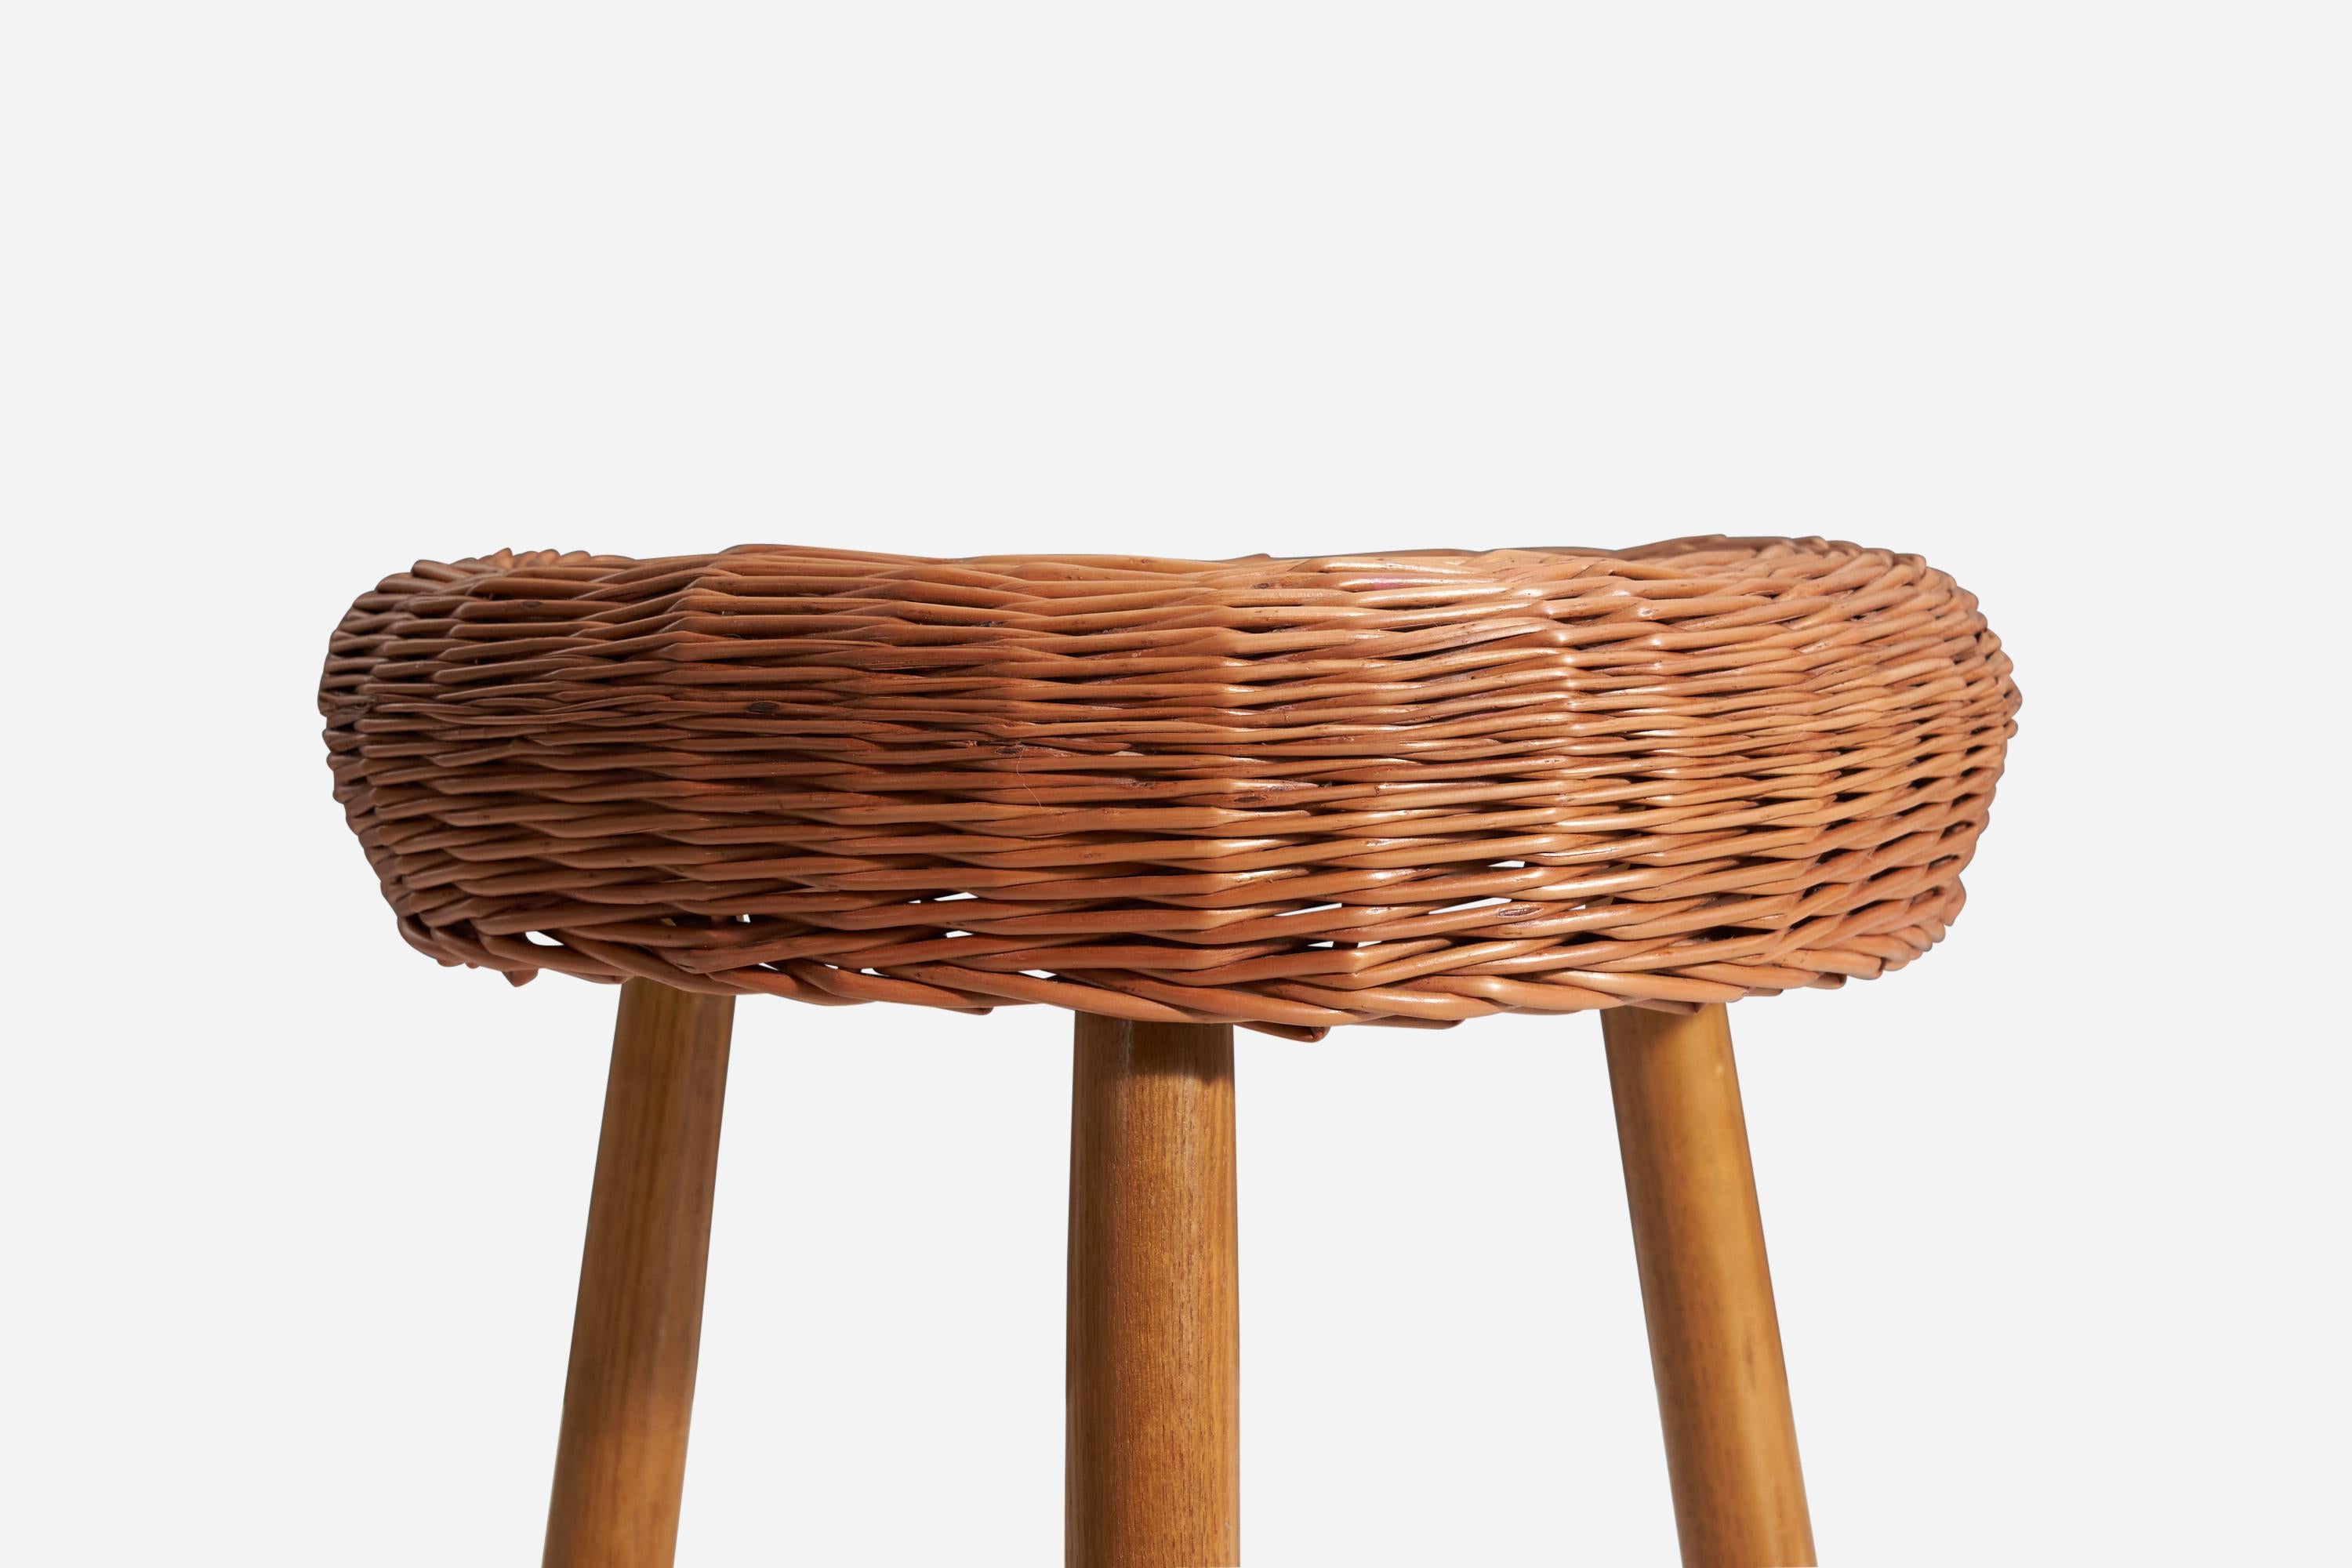 Tony Paul, Stool, Wicker, Wood, United States, 1950s In Good Condition For Sale In High Point, NC